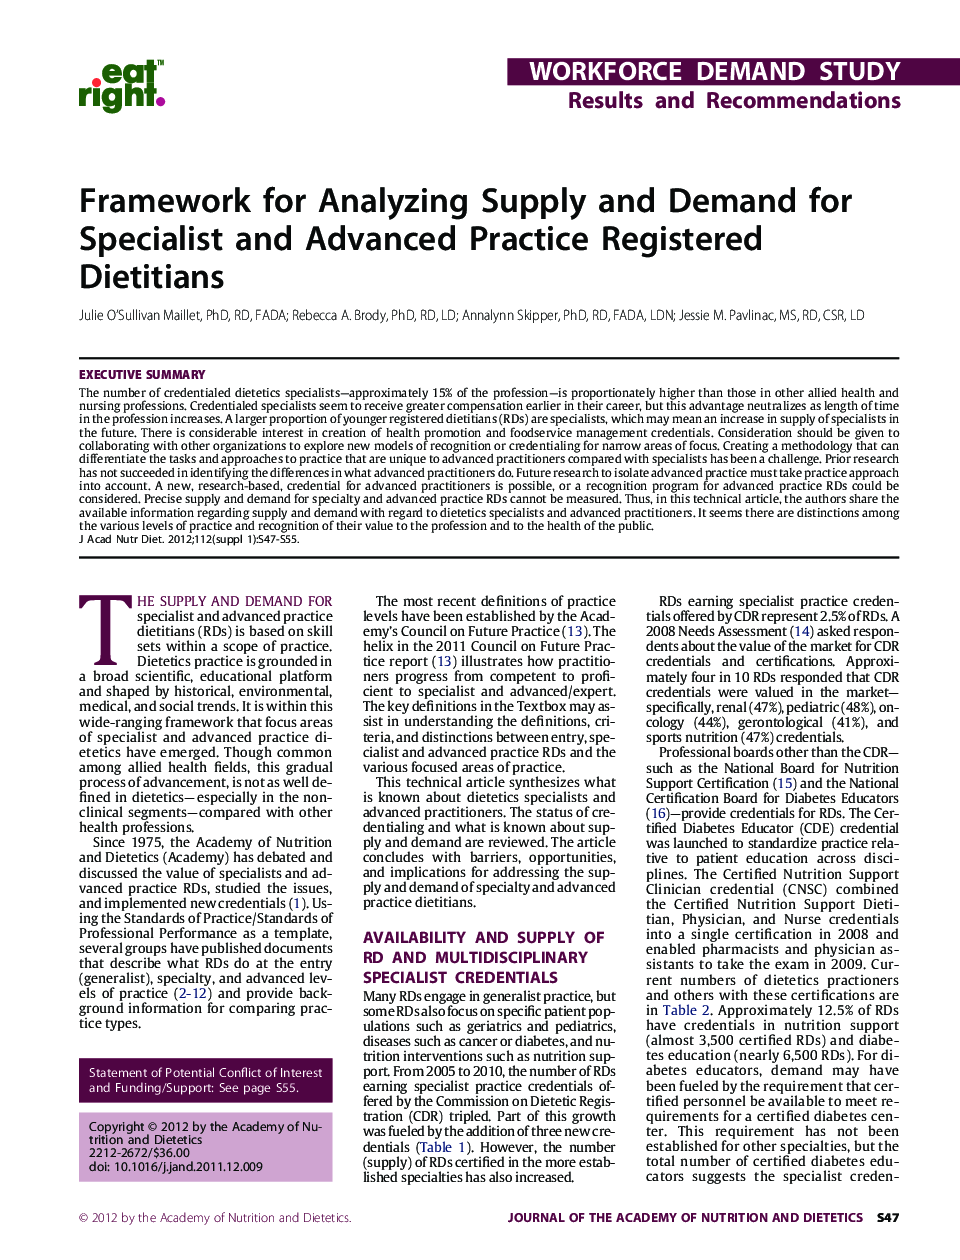 Framework for Analyzing Supply and Demand for Specialist and Advanced Practice Registered Dietitians 